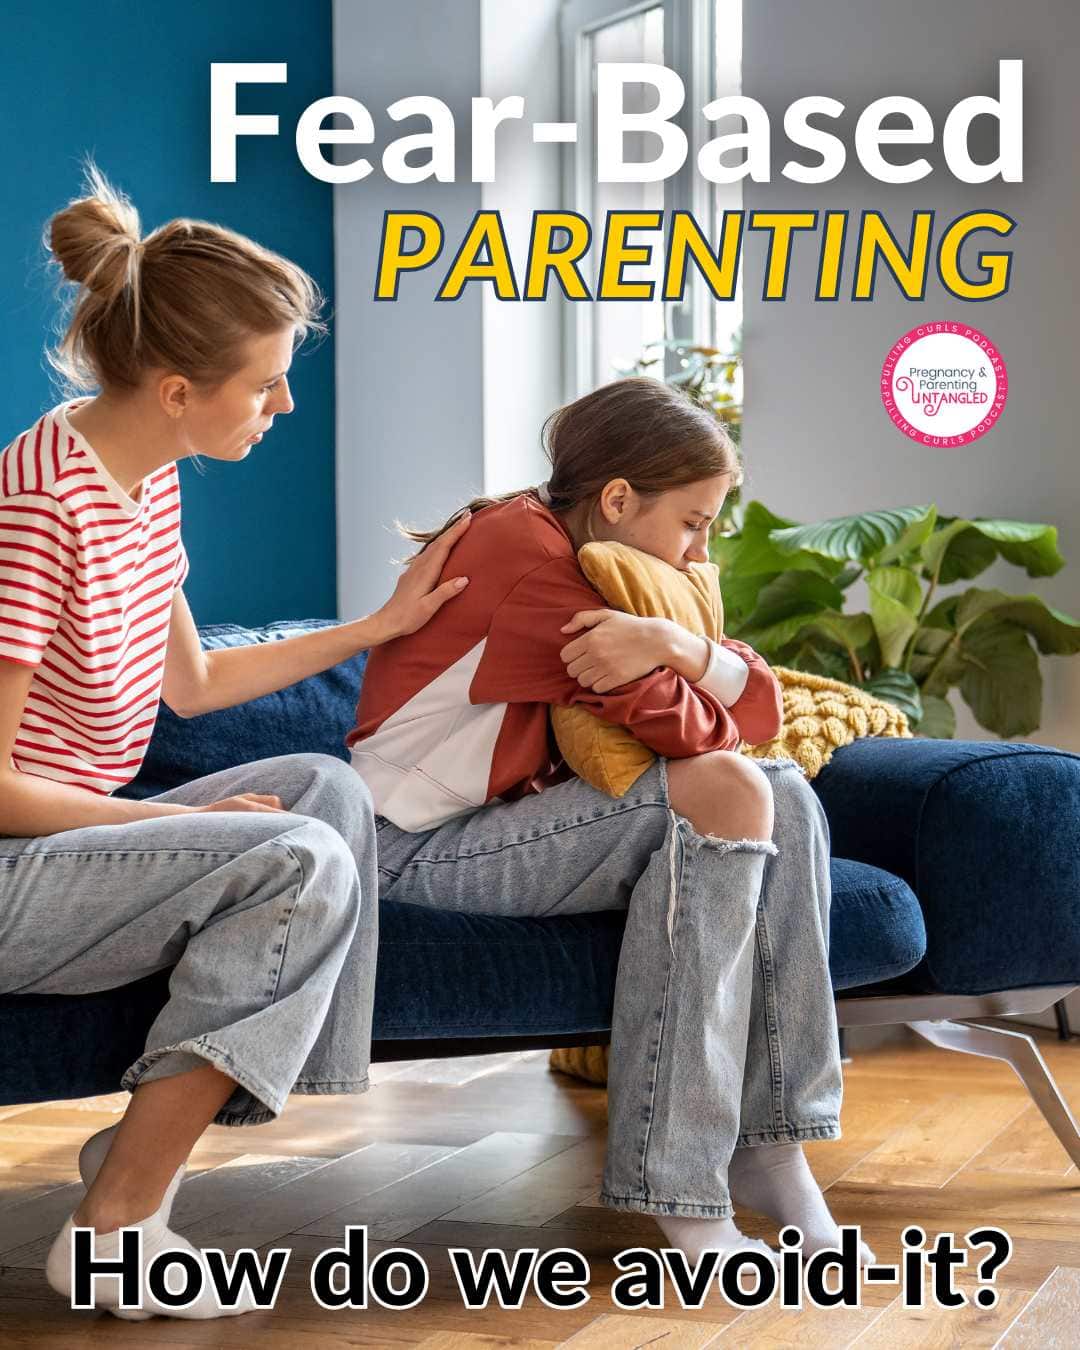 Mom rubbing back of teenager. // fear-based parenting how do we avoid it? via @pullingcurls